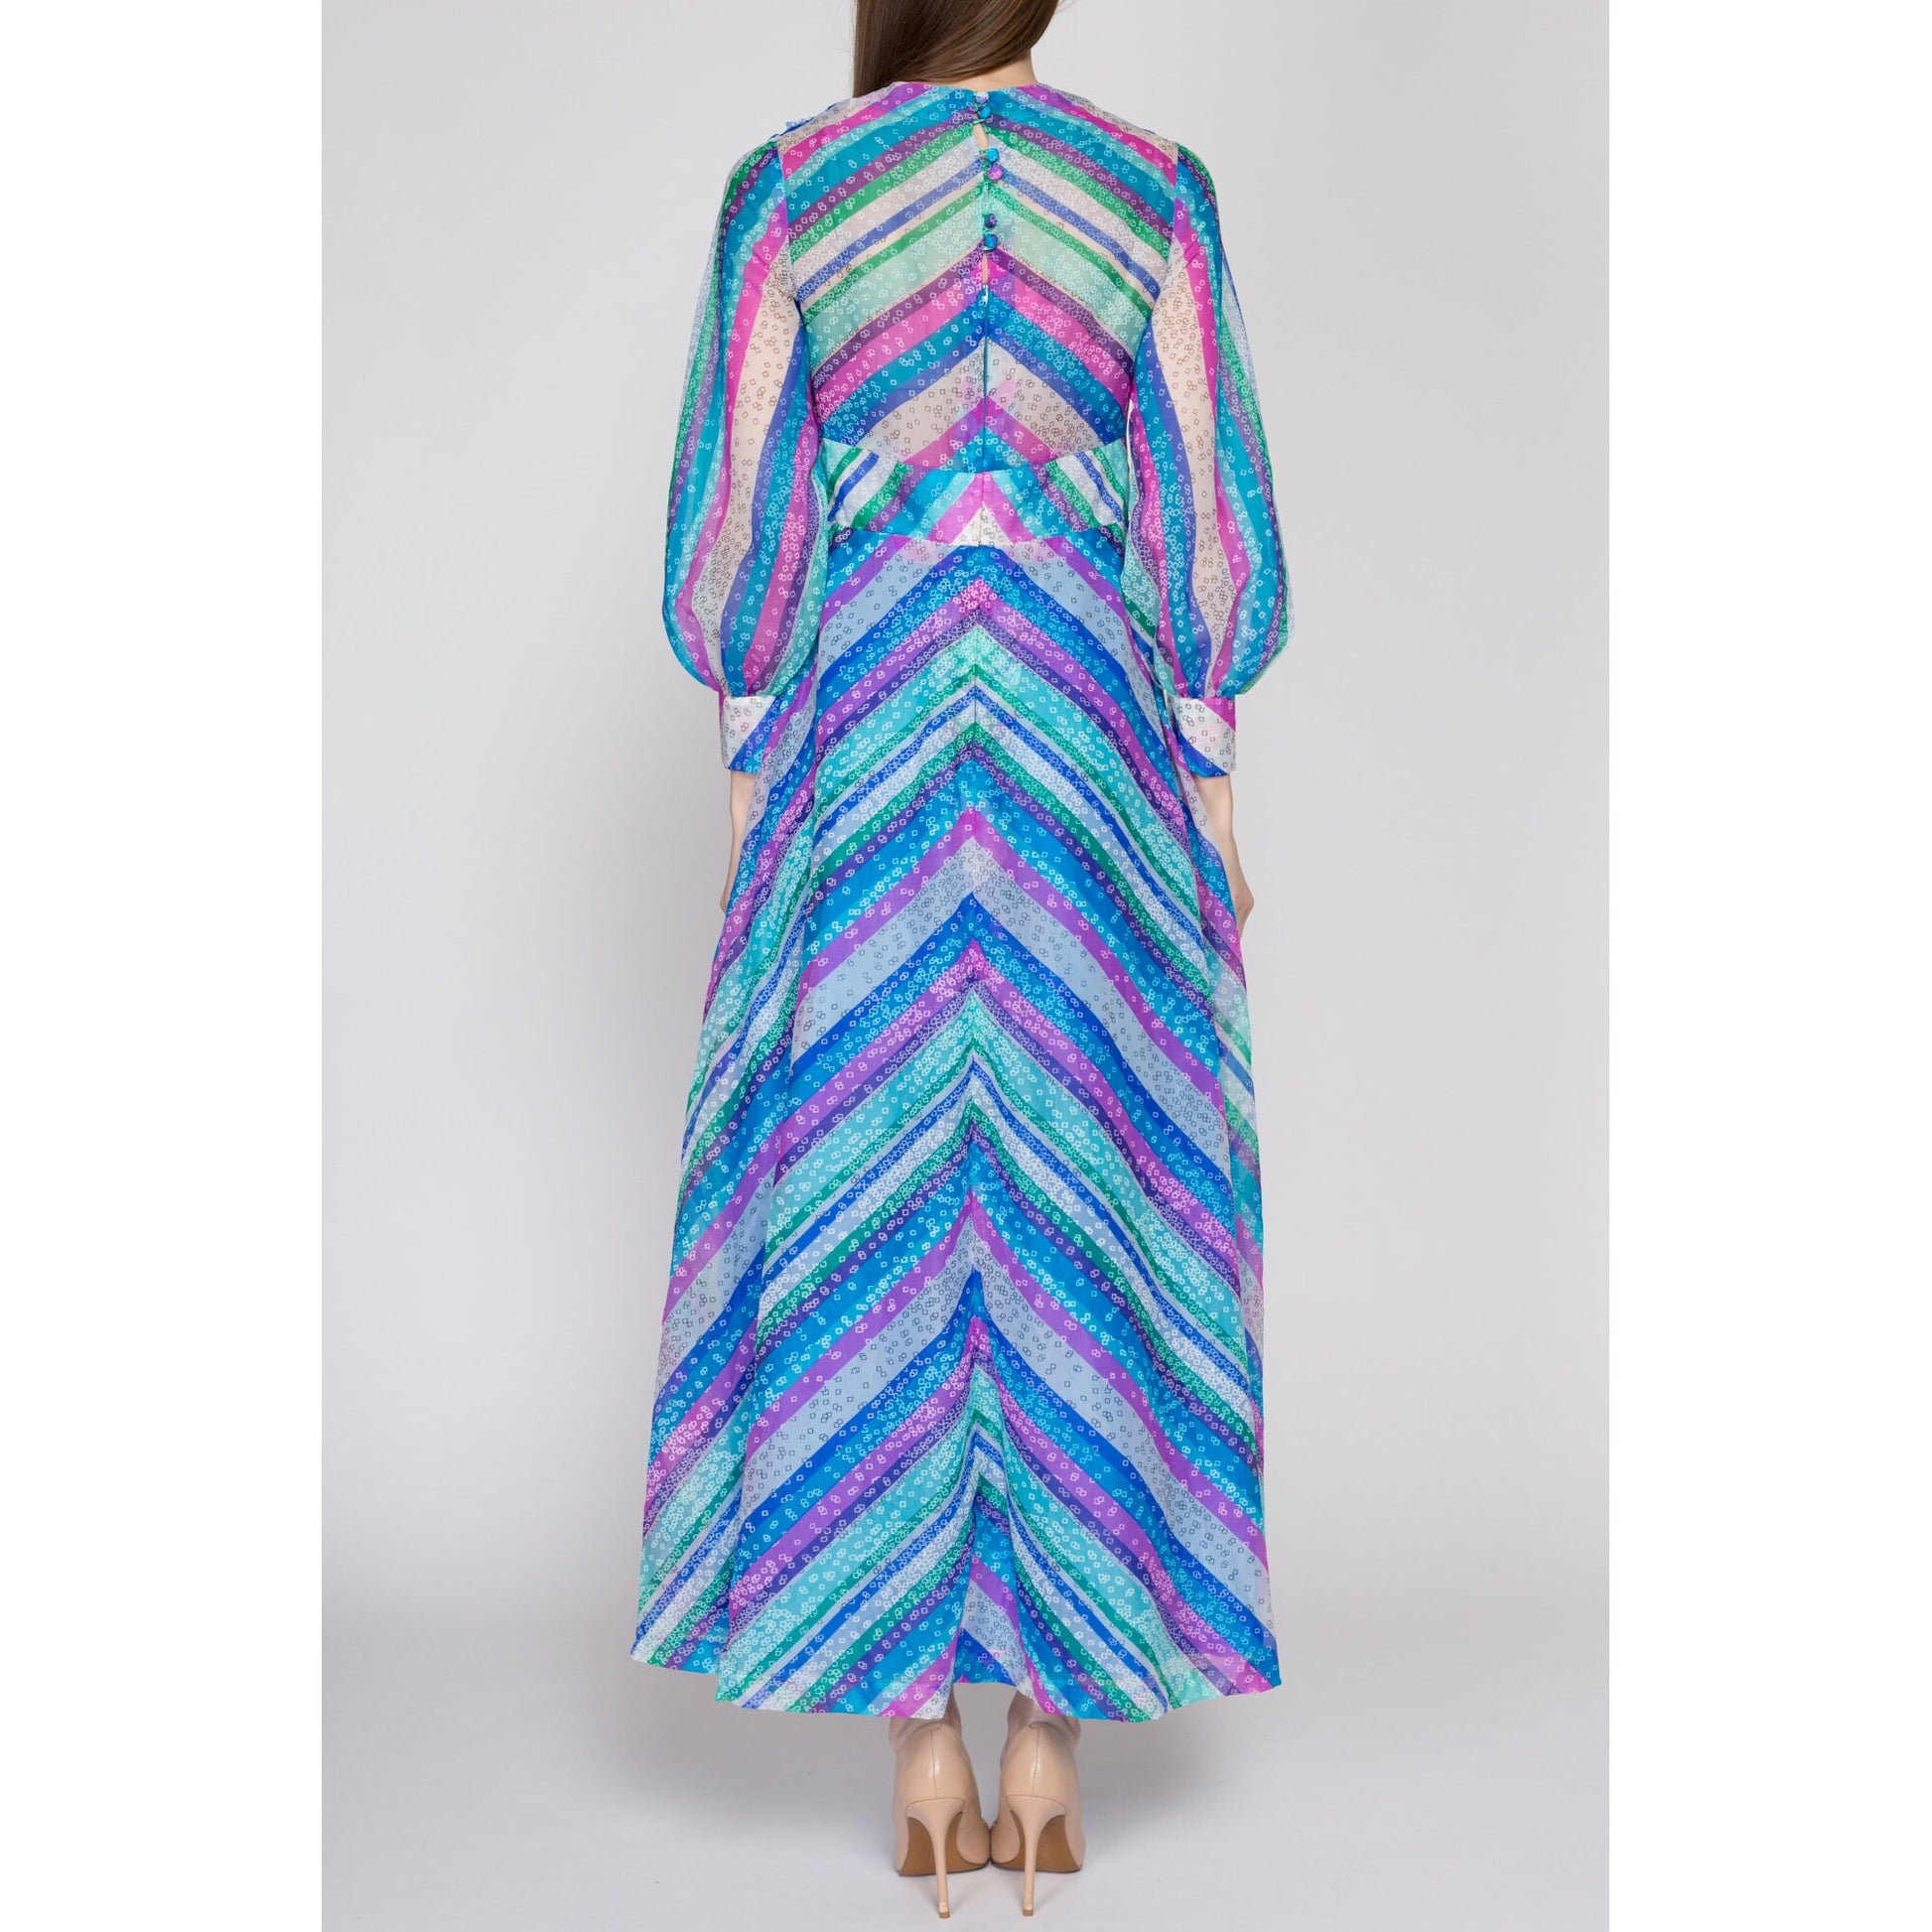 Small 60s 70s Psychedelic Striped Maxi Dress Petite | Vintage Sheer Sleeve A Line Hippie Gown